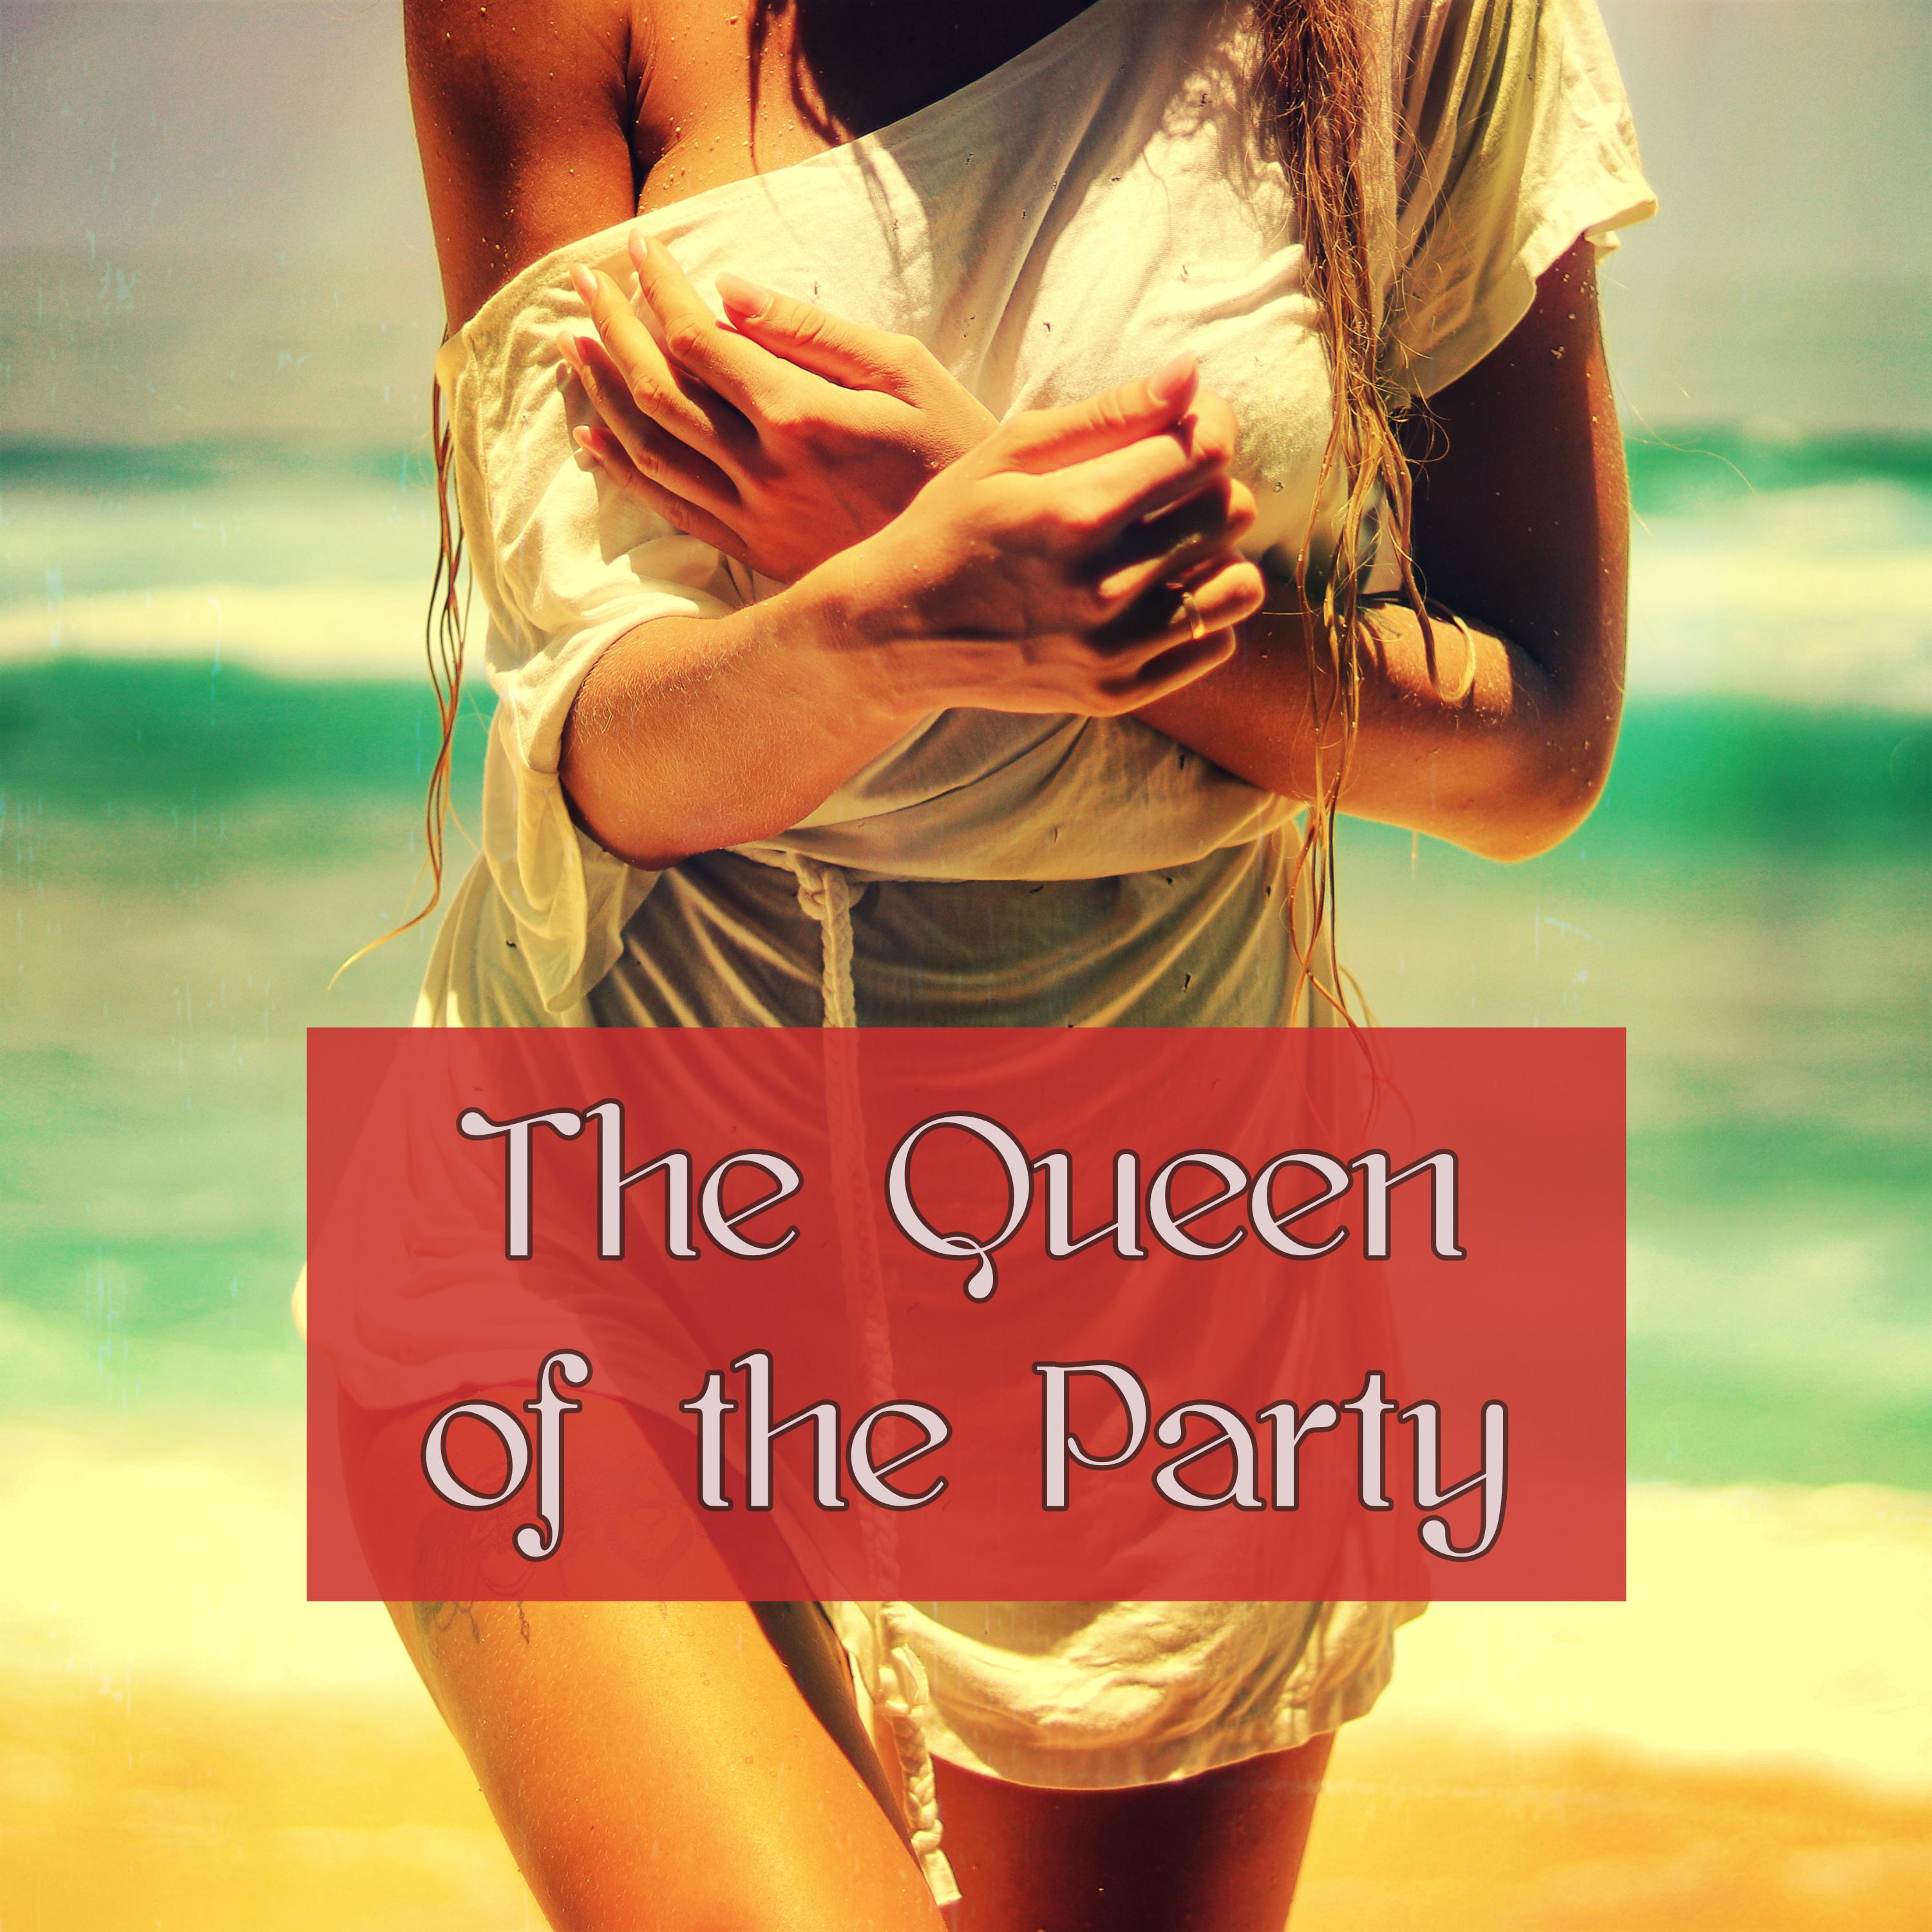 The Queen of the Party – Electronic Party Songs for **** 'n' Funky Night